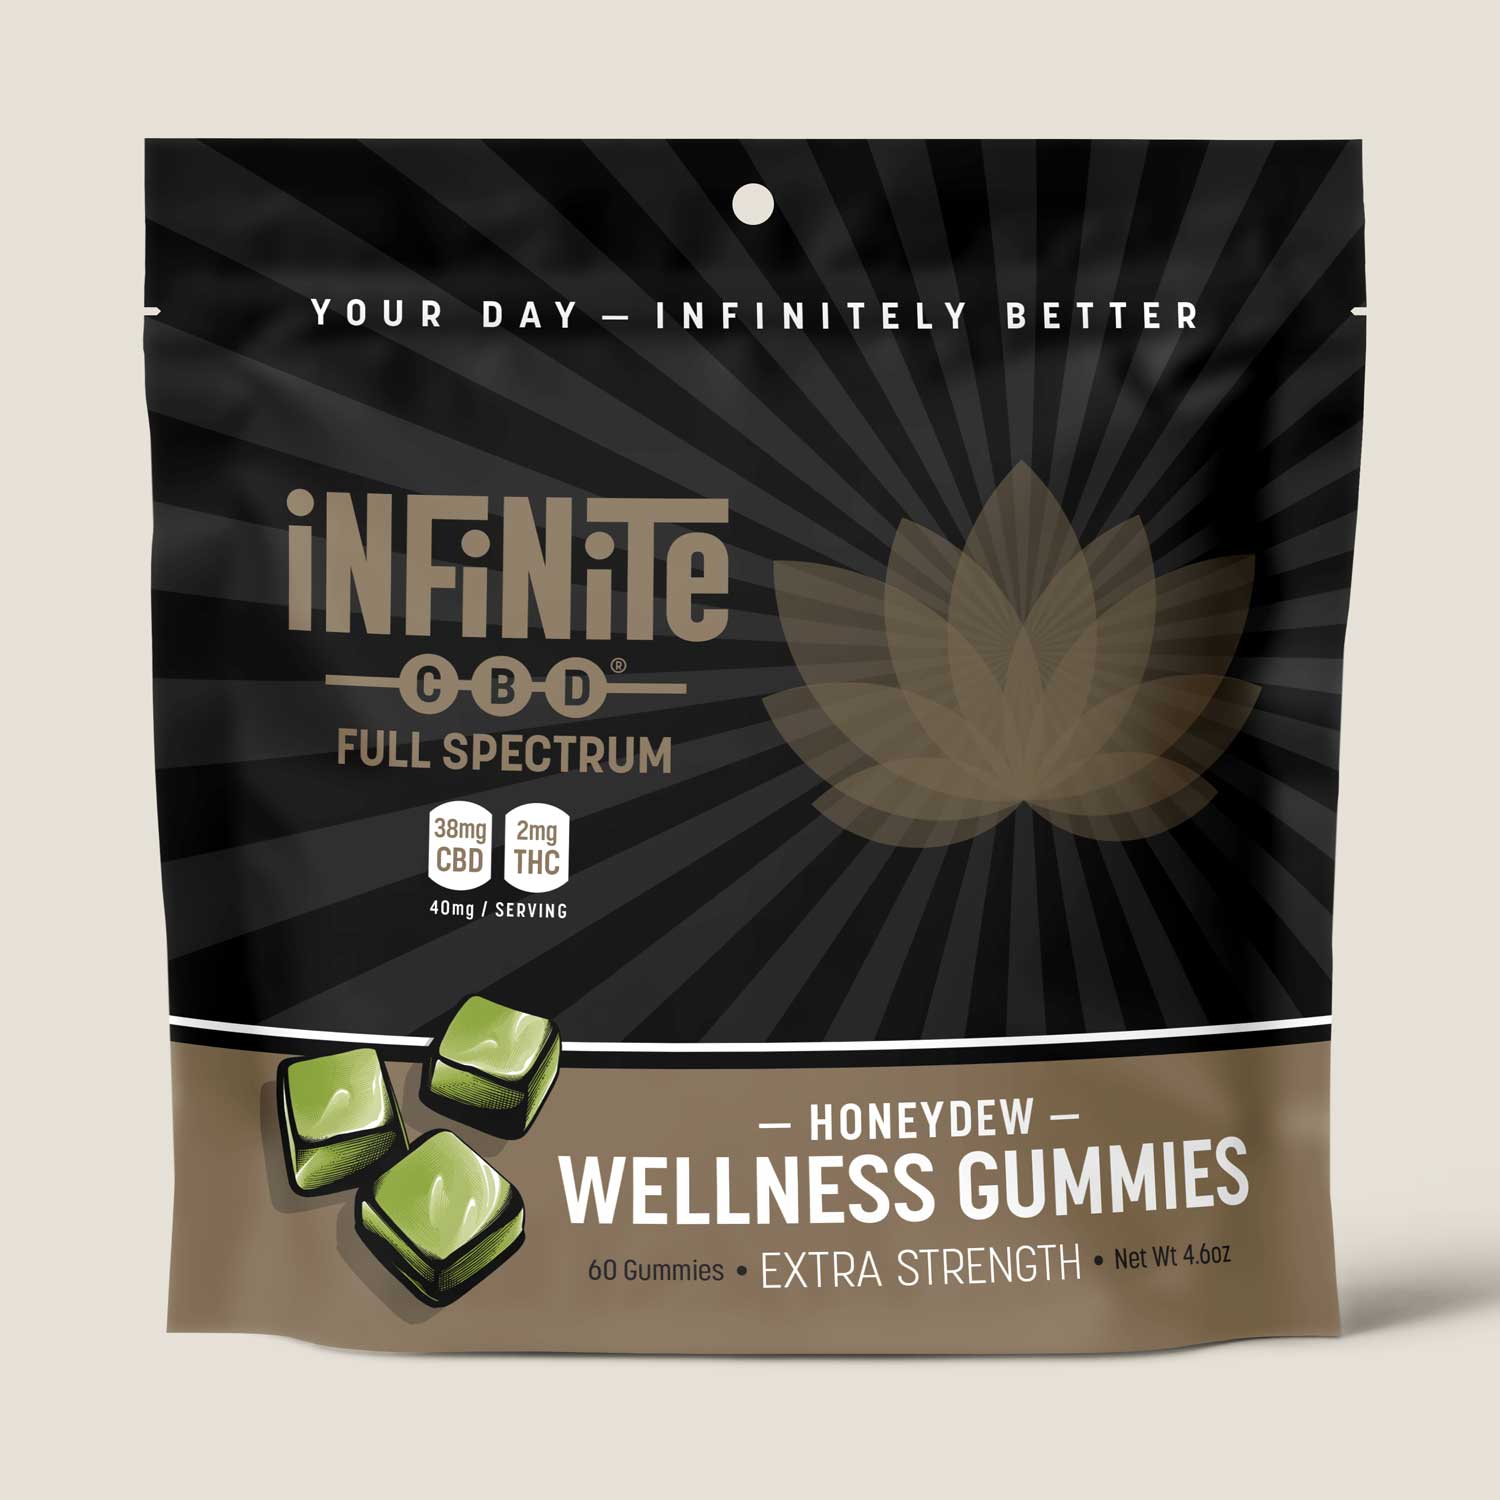 Gummies<br>Formulation: Wellness<br>CBD: Full Spectrum (Contains THC)<br>Concentration: Extra (40mg/serving)